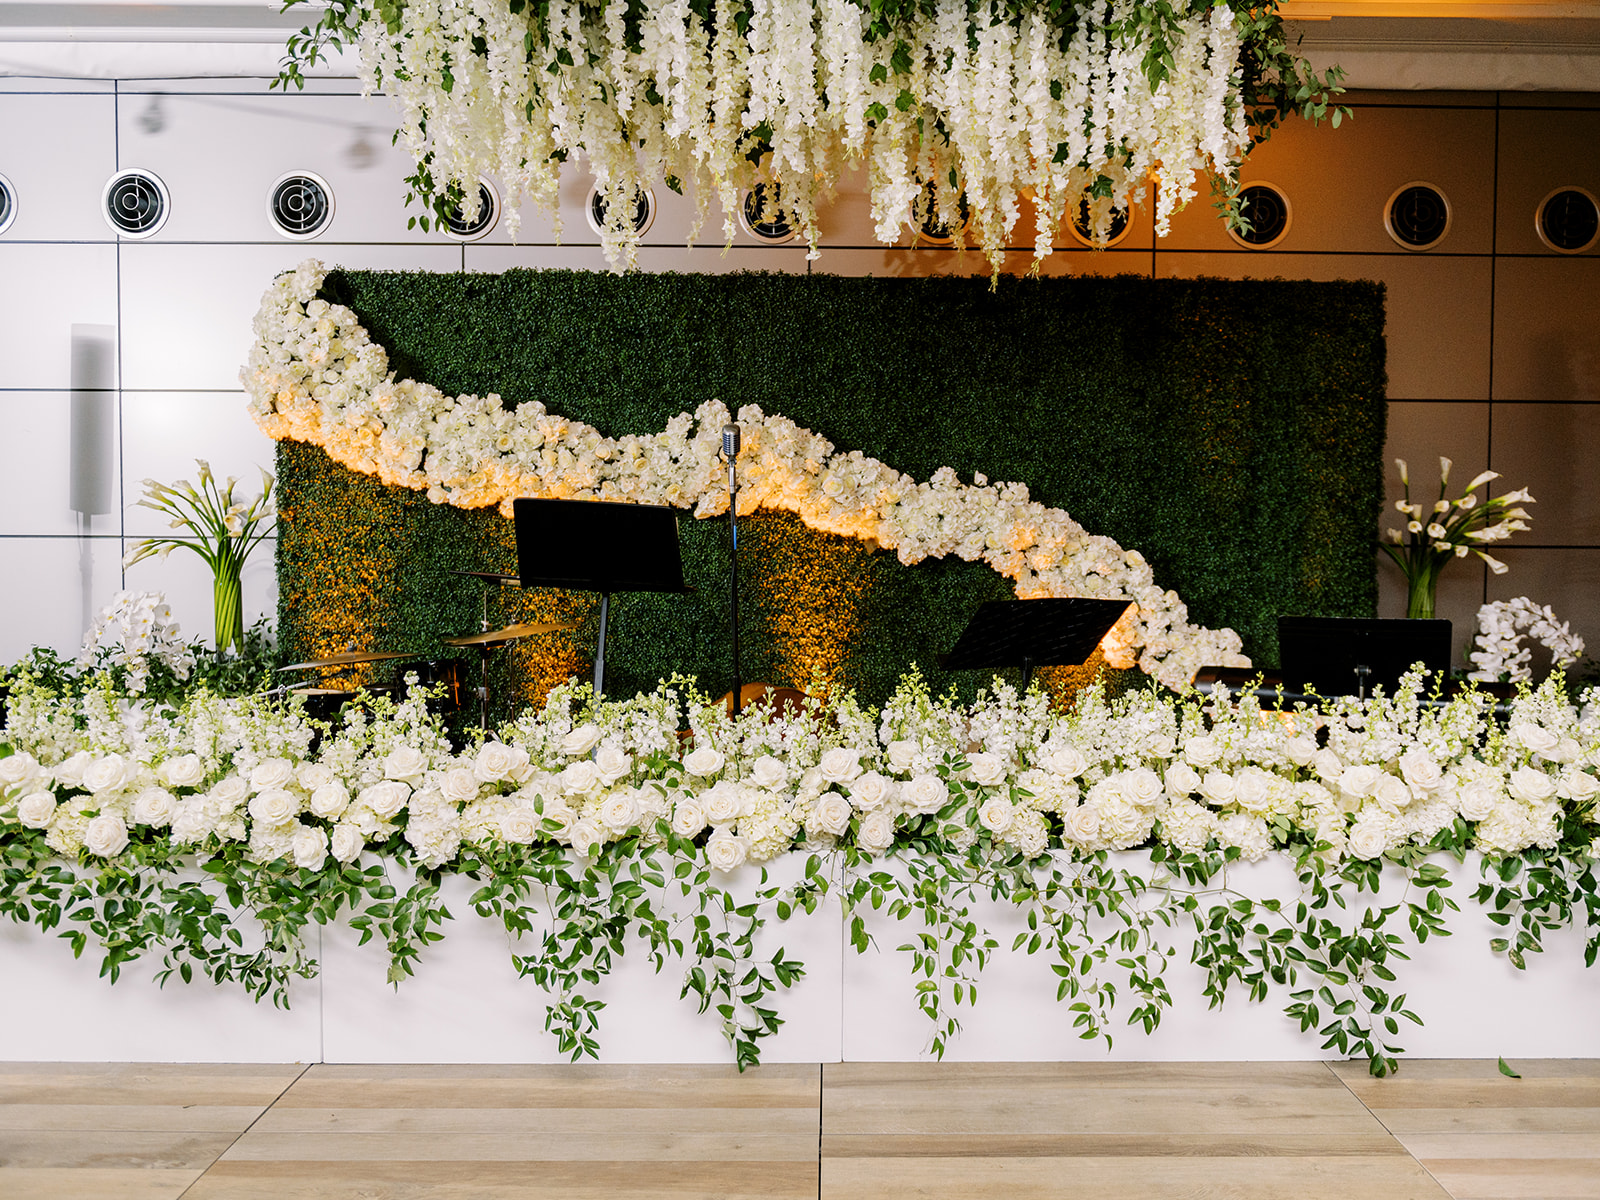 A Spy Museum Wedding With a Cocktail Party Reception